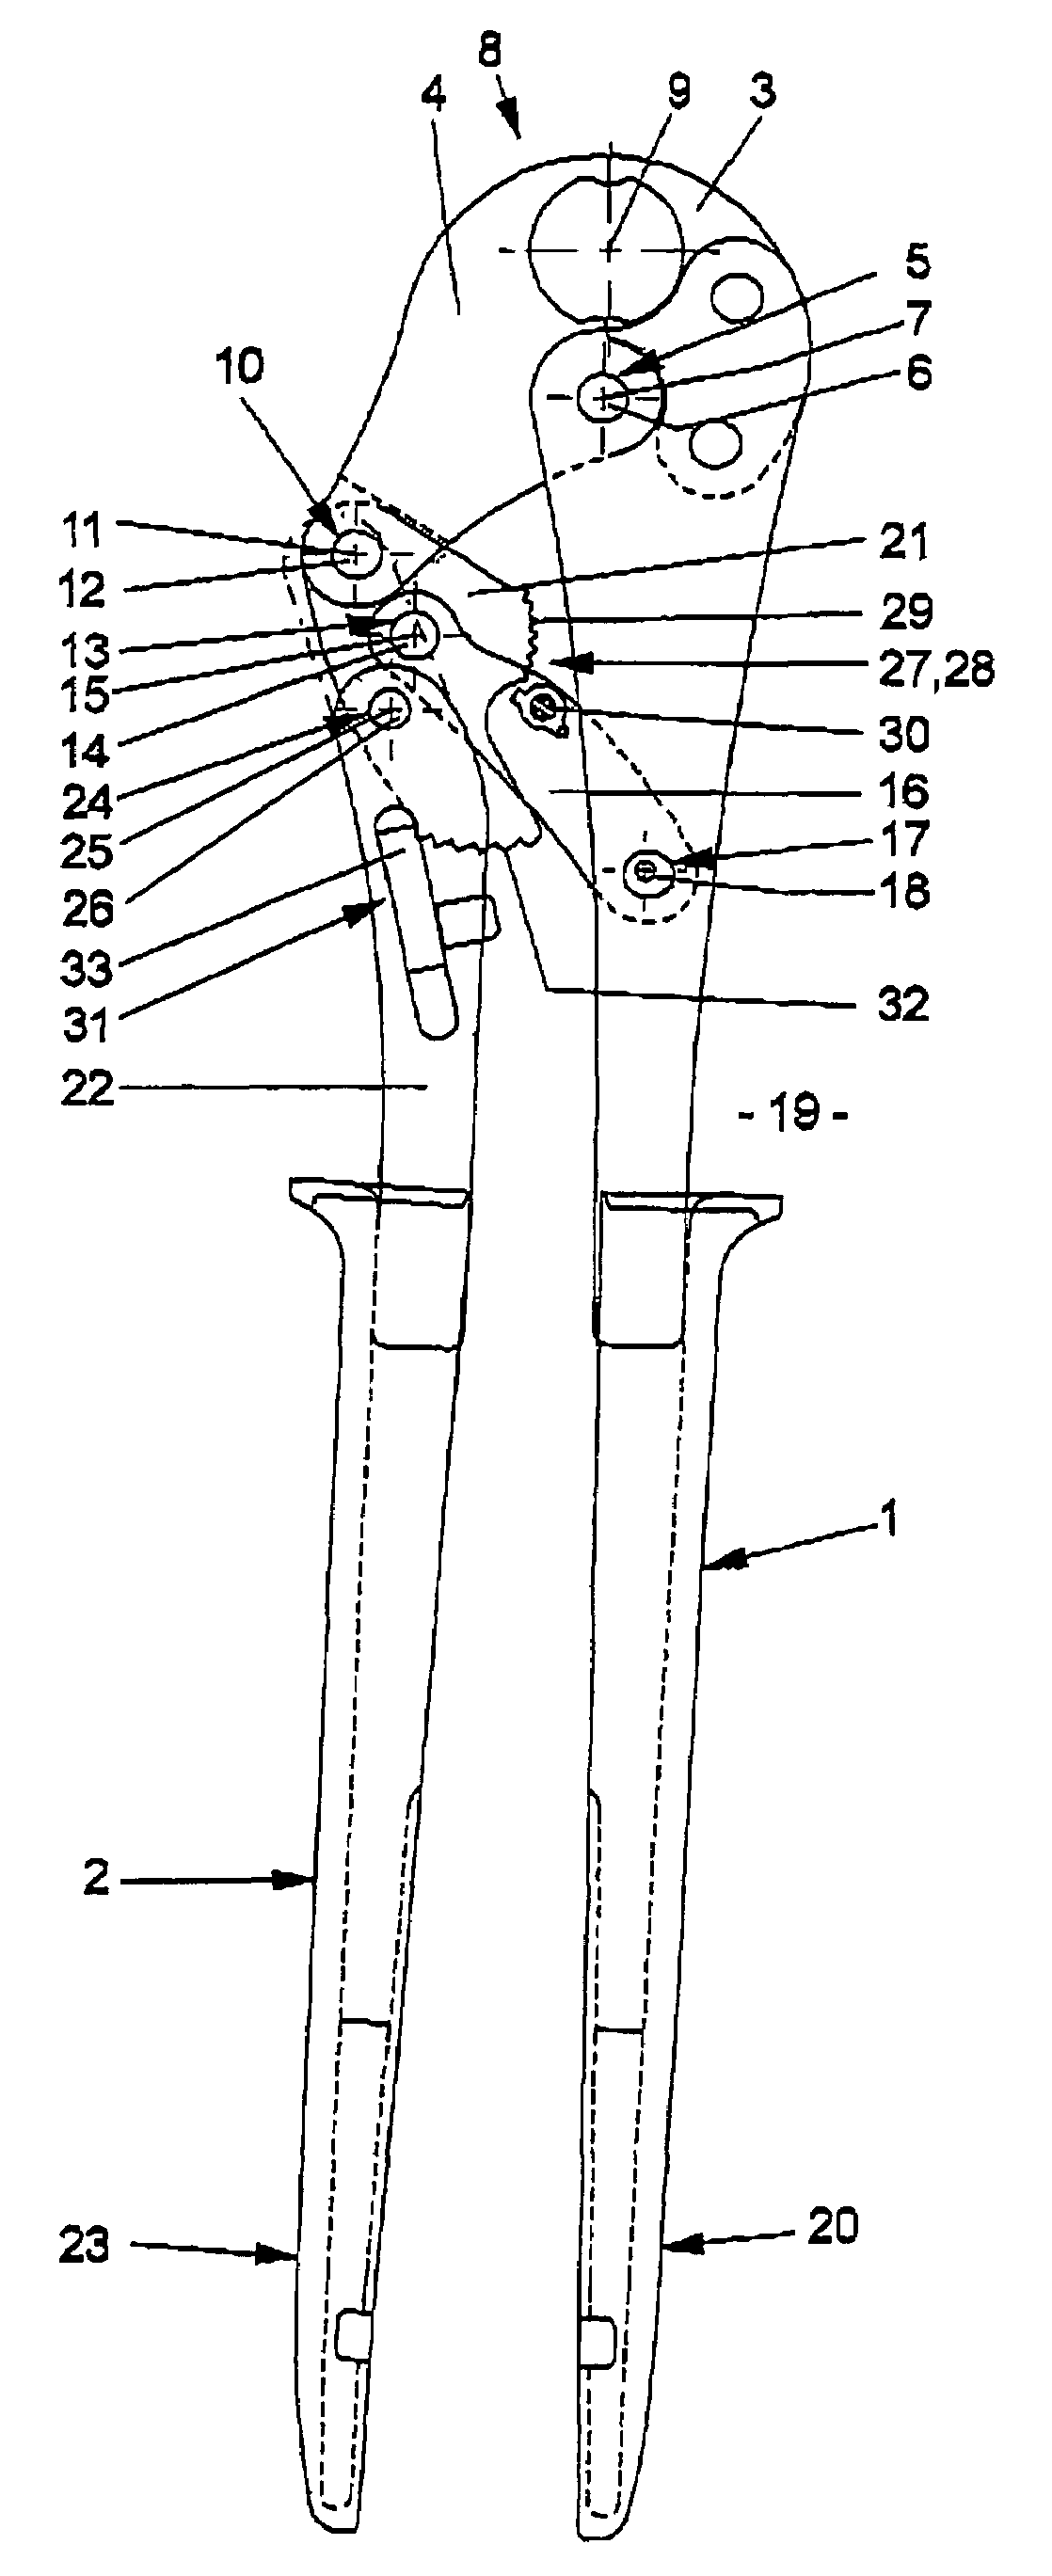 Pliers for crimping work pieces